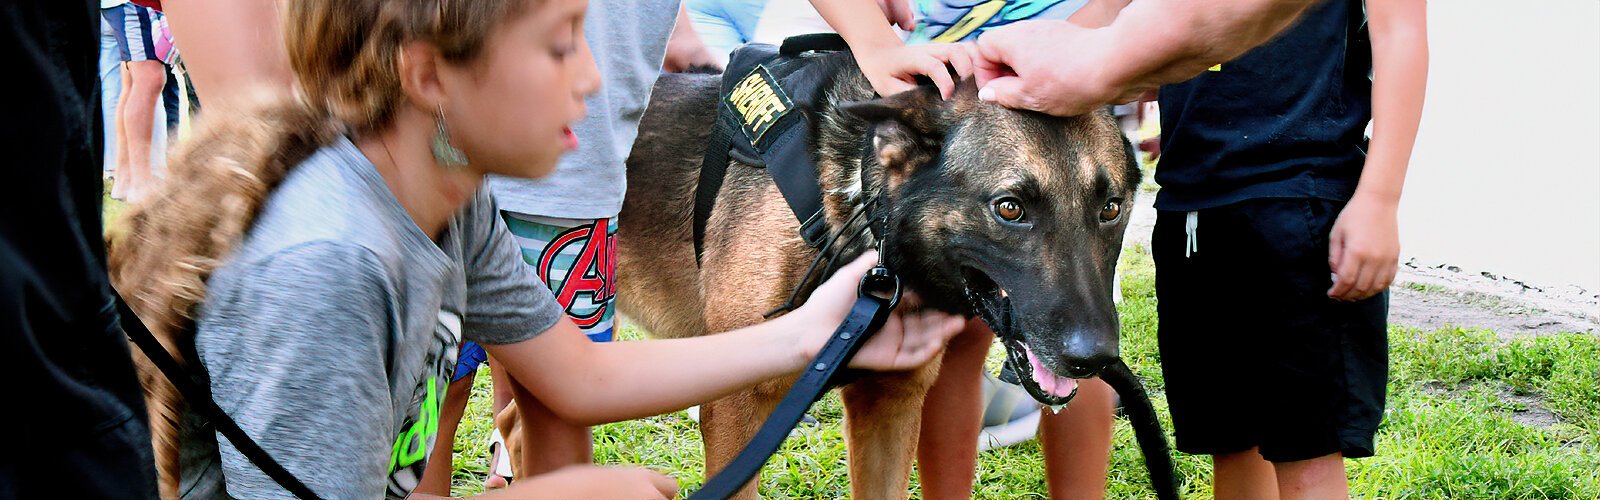 Attendees pet new graduate K-9 Rogue as they meet some of the four-legged deputies on the field.